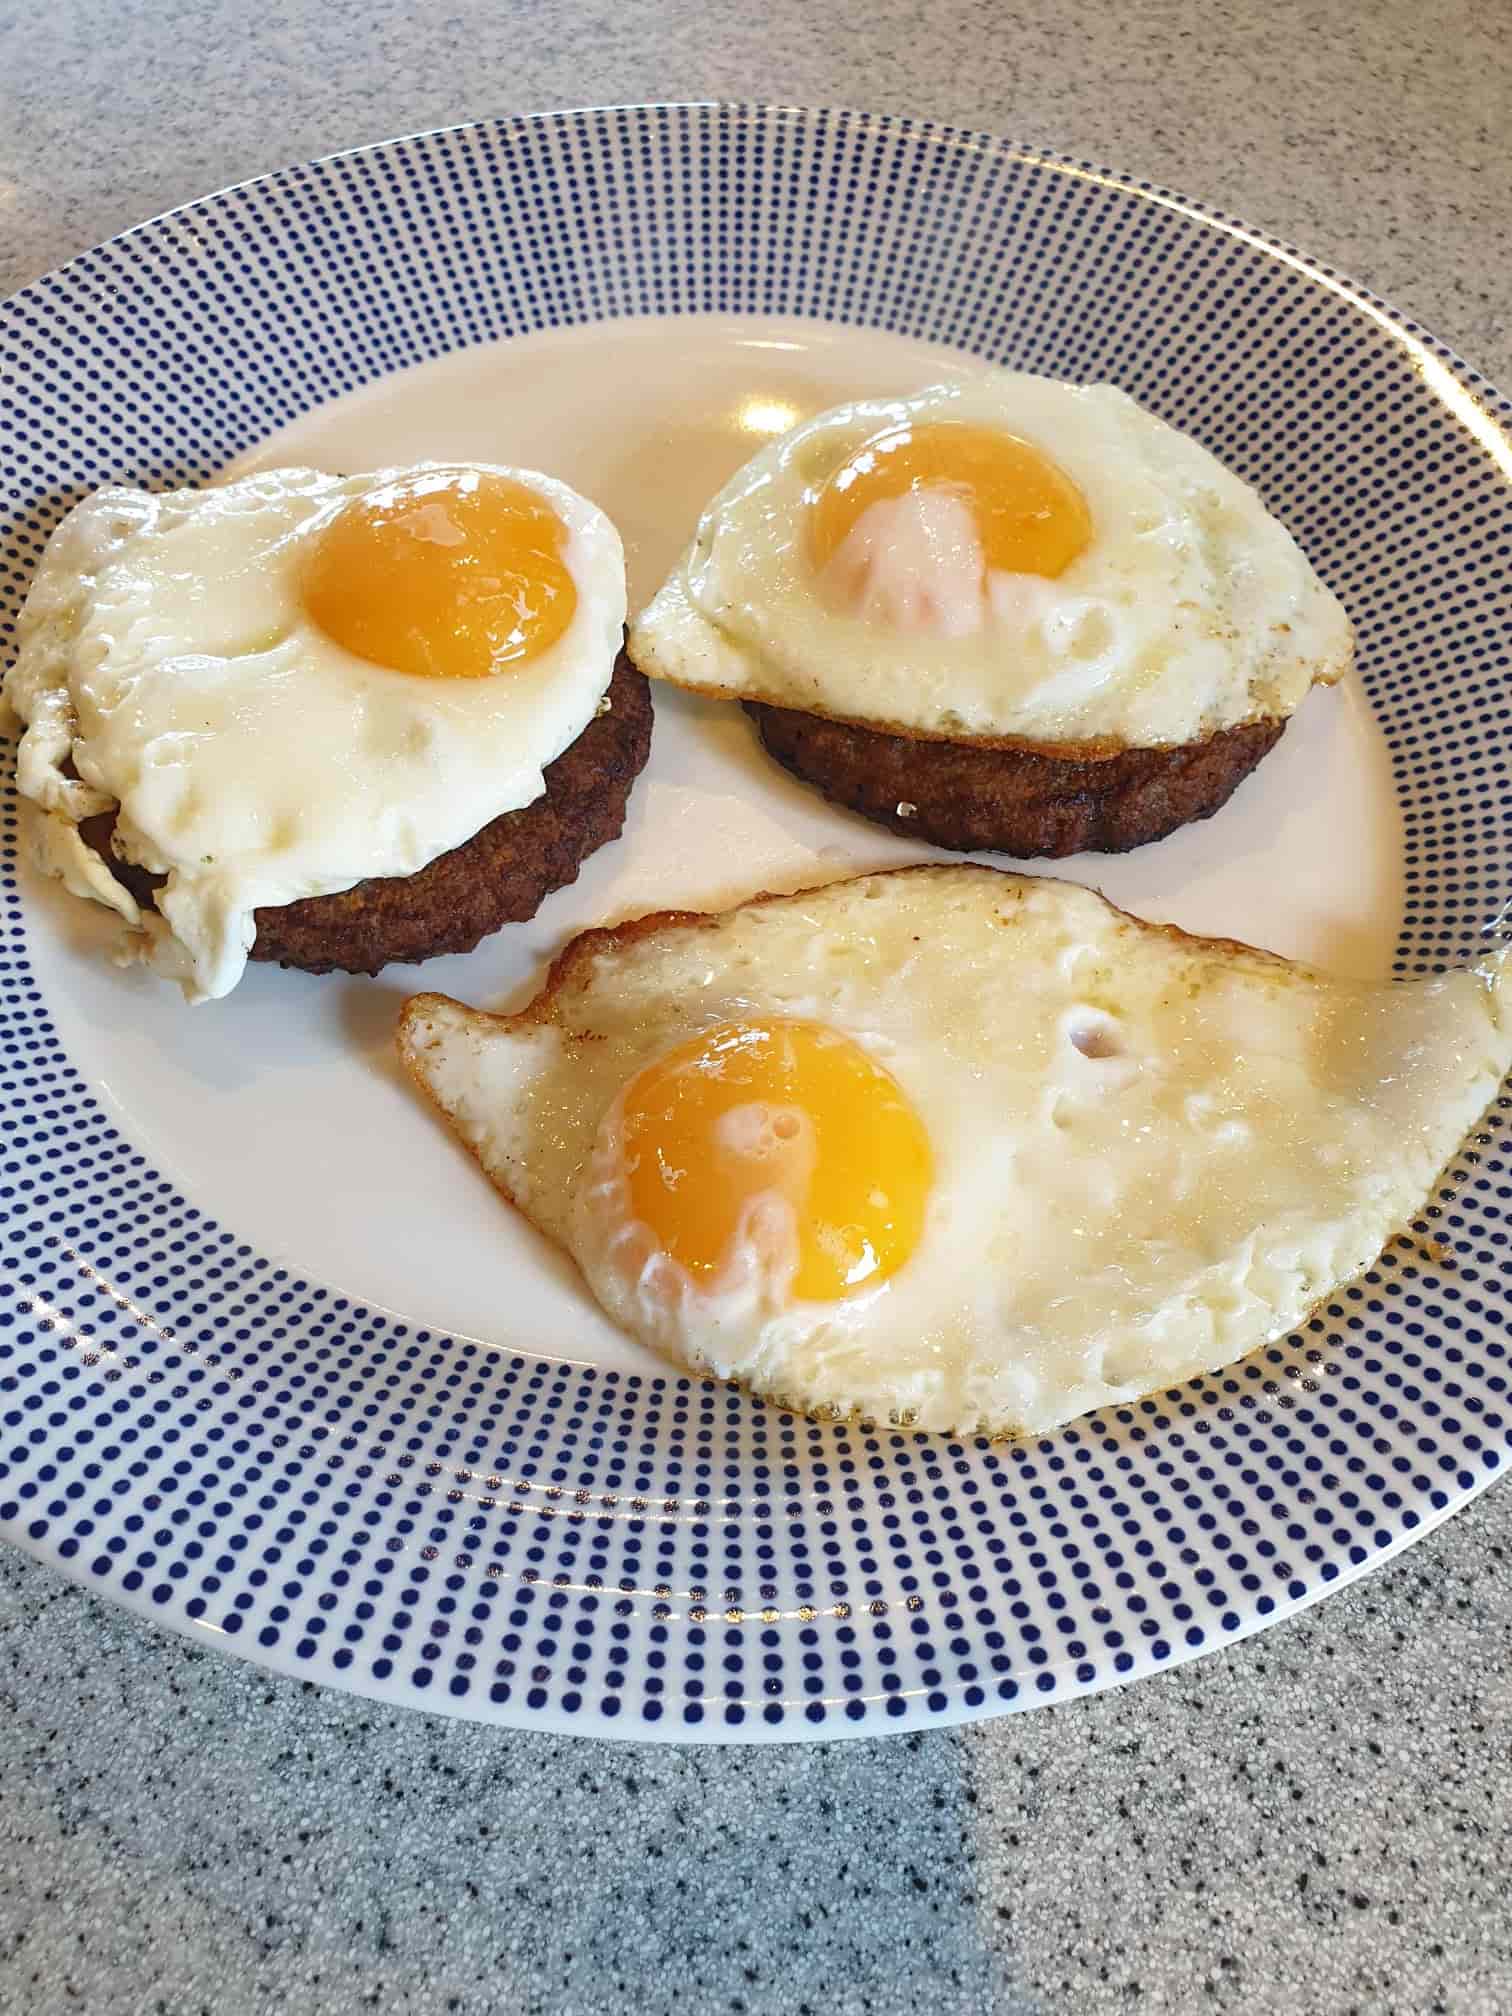 burgers and eggs